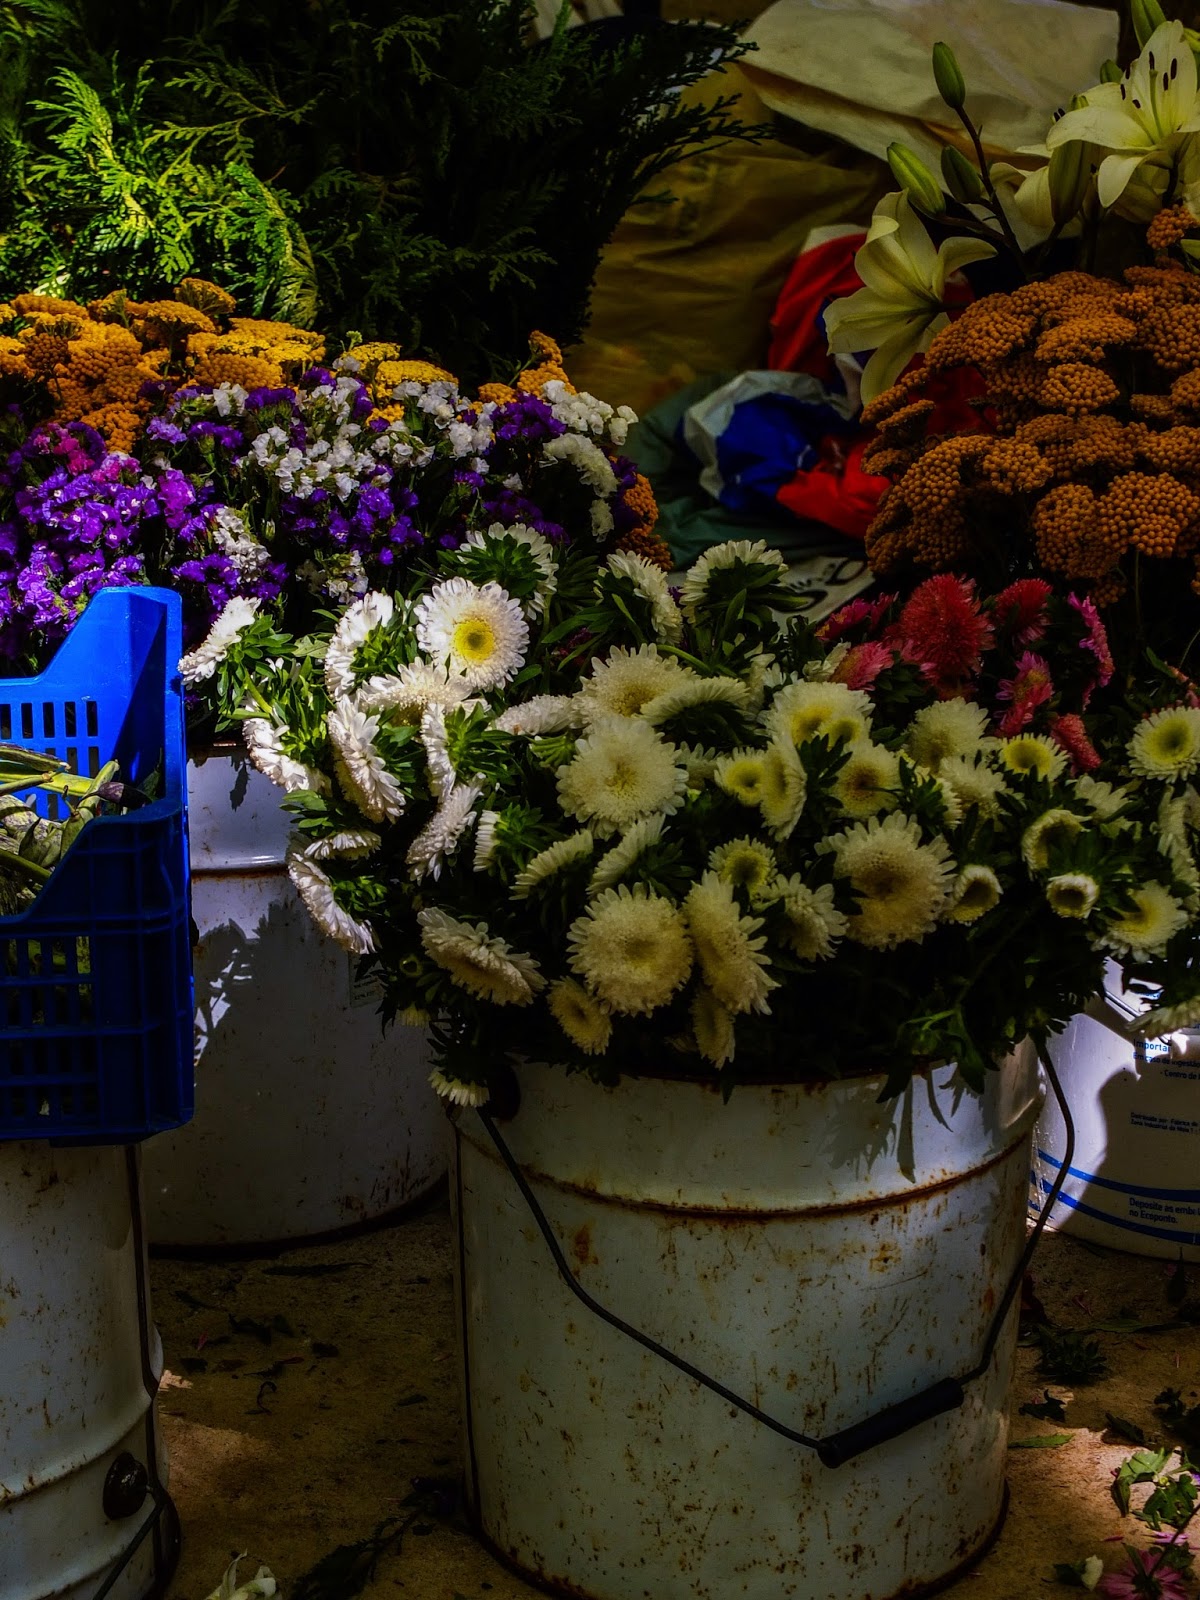 Flowers in a white rusty bucket displayed in sunlight at a market in Porto, Portugal.